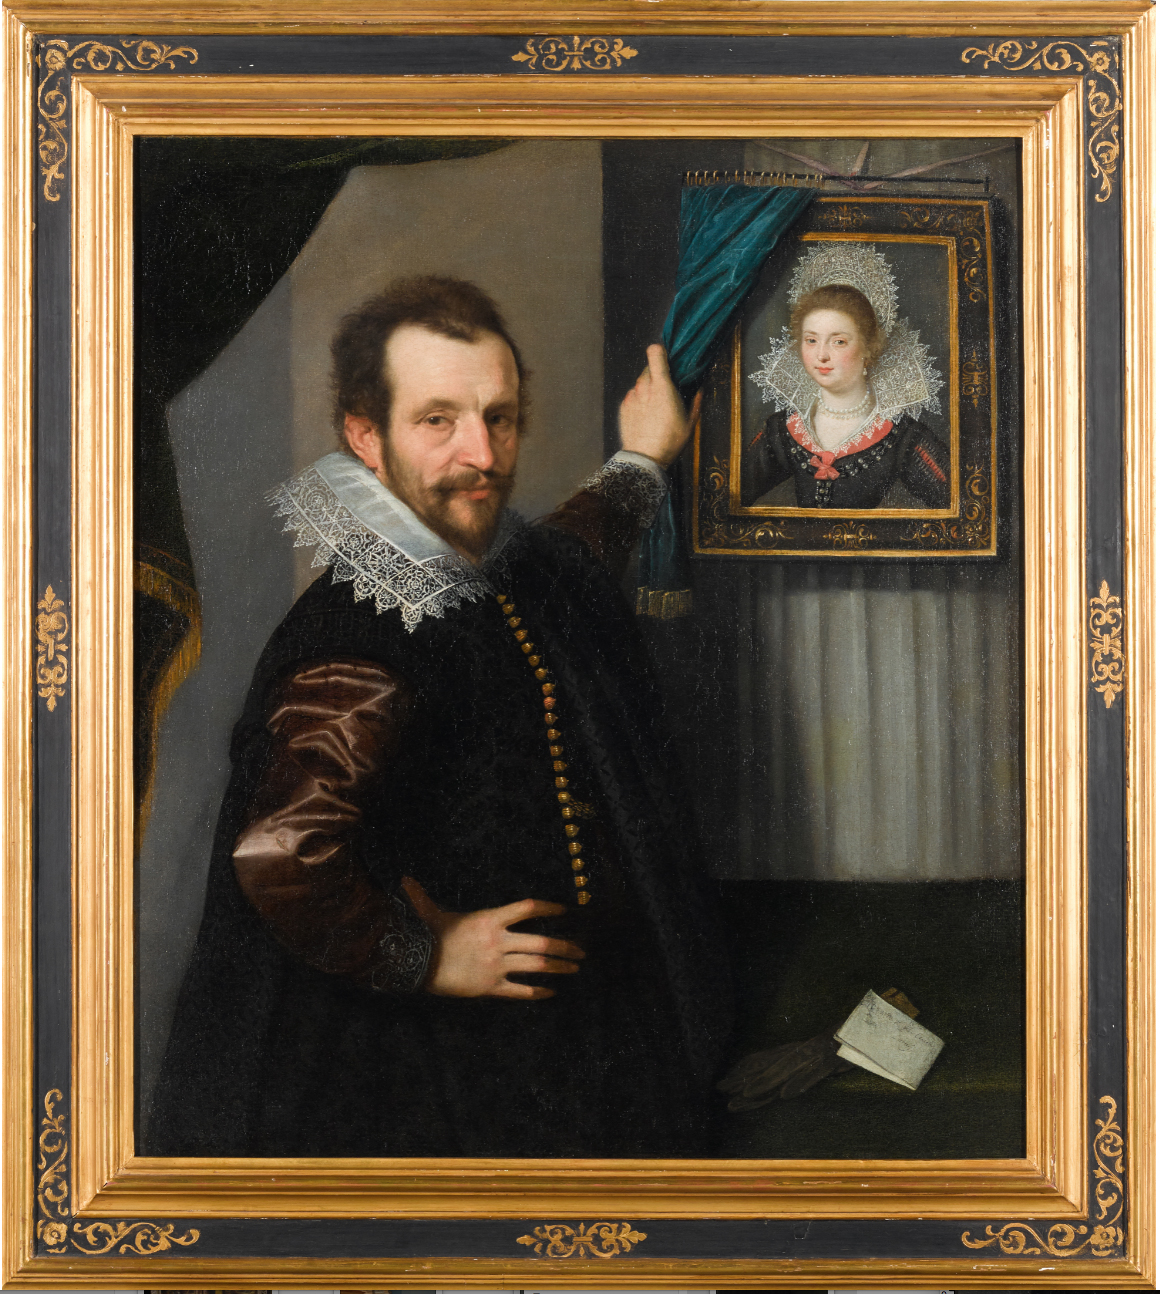 45A ItaloFlemish School Portrait of gentleman beside a framed portrait of a lady C17 o c 104x91.1cm Sothebys 8Apr2020 Lot 9 Old frame + inlay + refinished Query